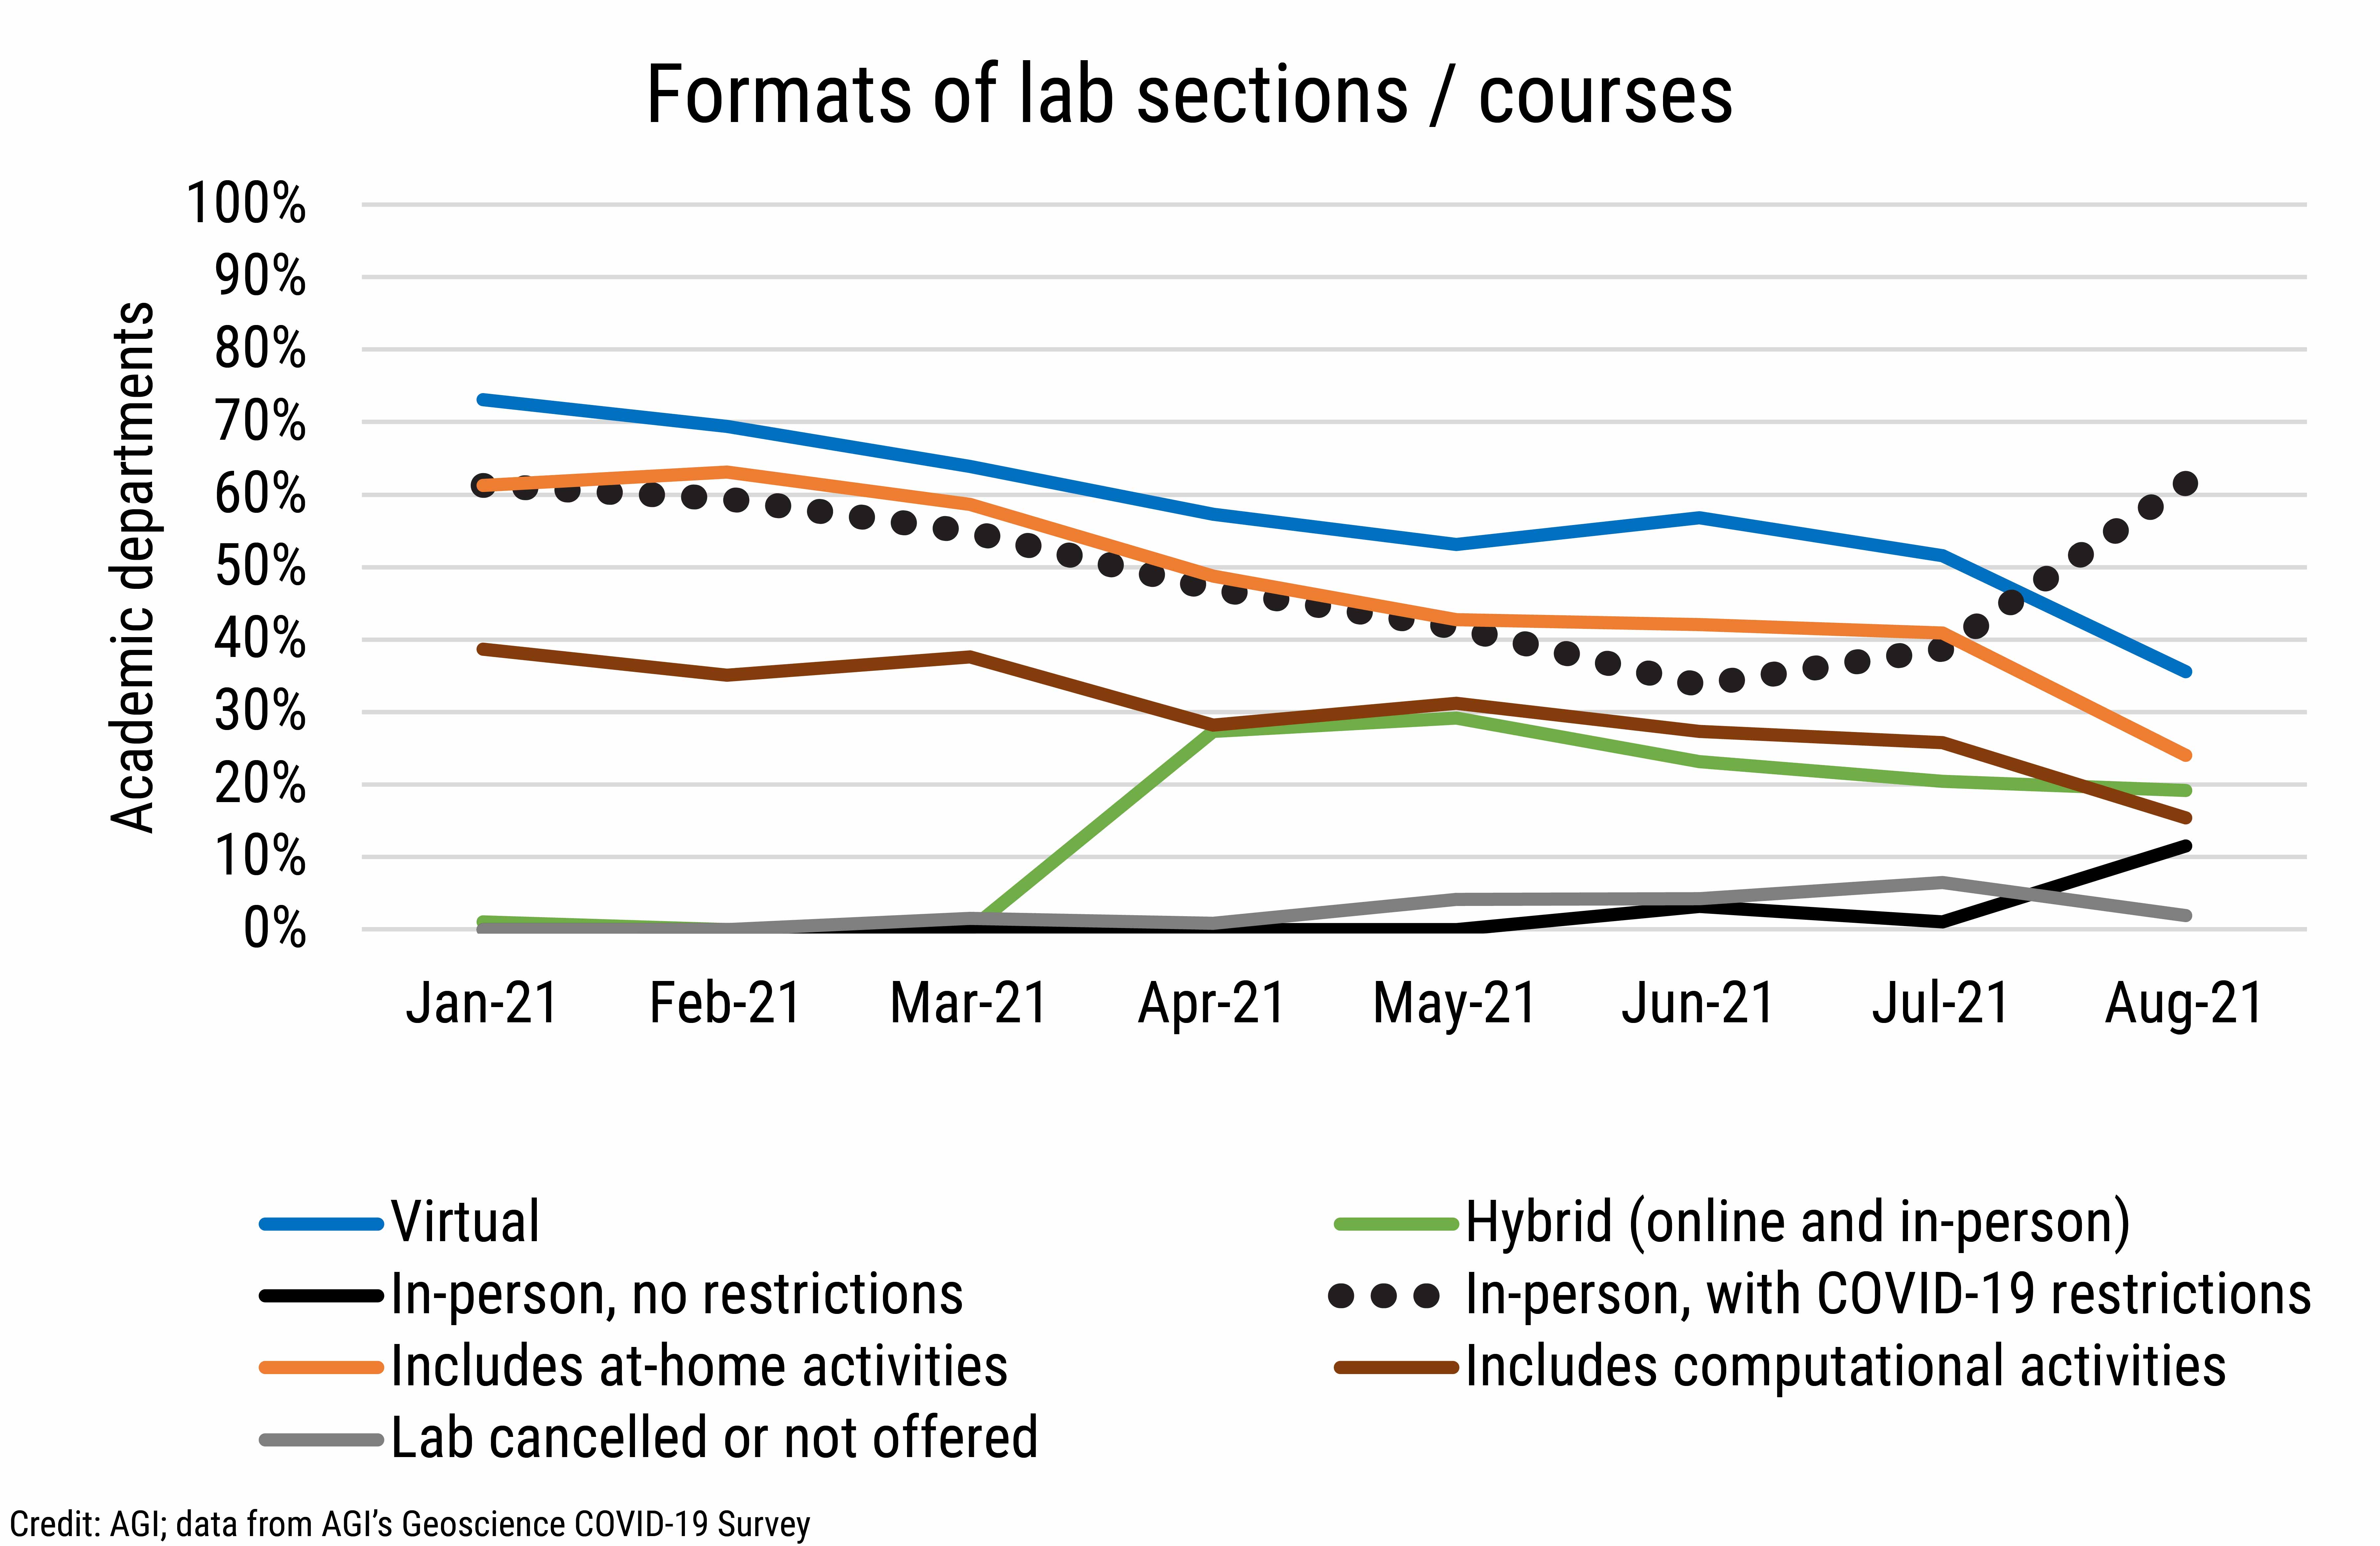 DB_2021-027 chart 04: Formats of lab sections / courses (Credit: AGI; data from AGI's Geoscience COVID-19 Survey)